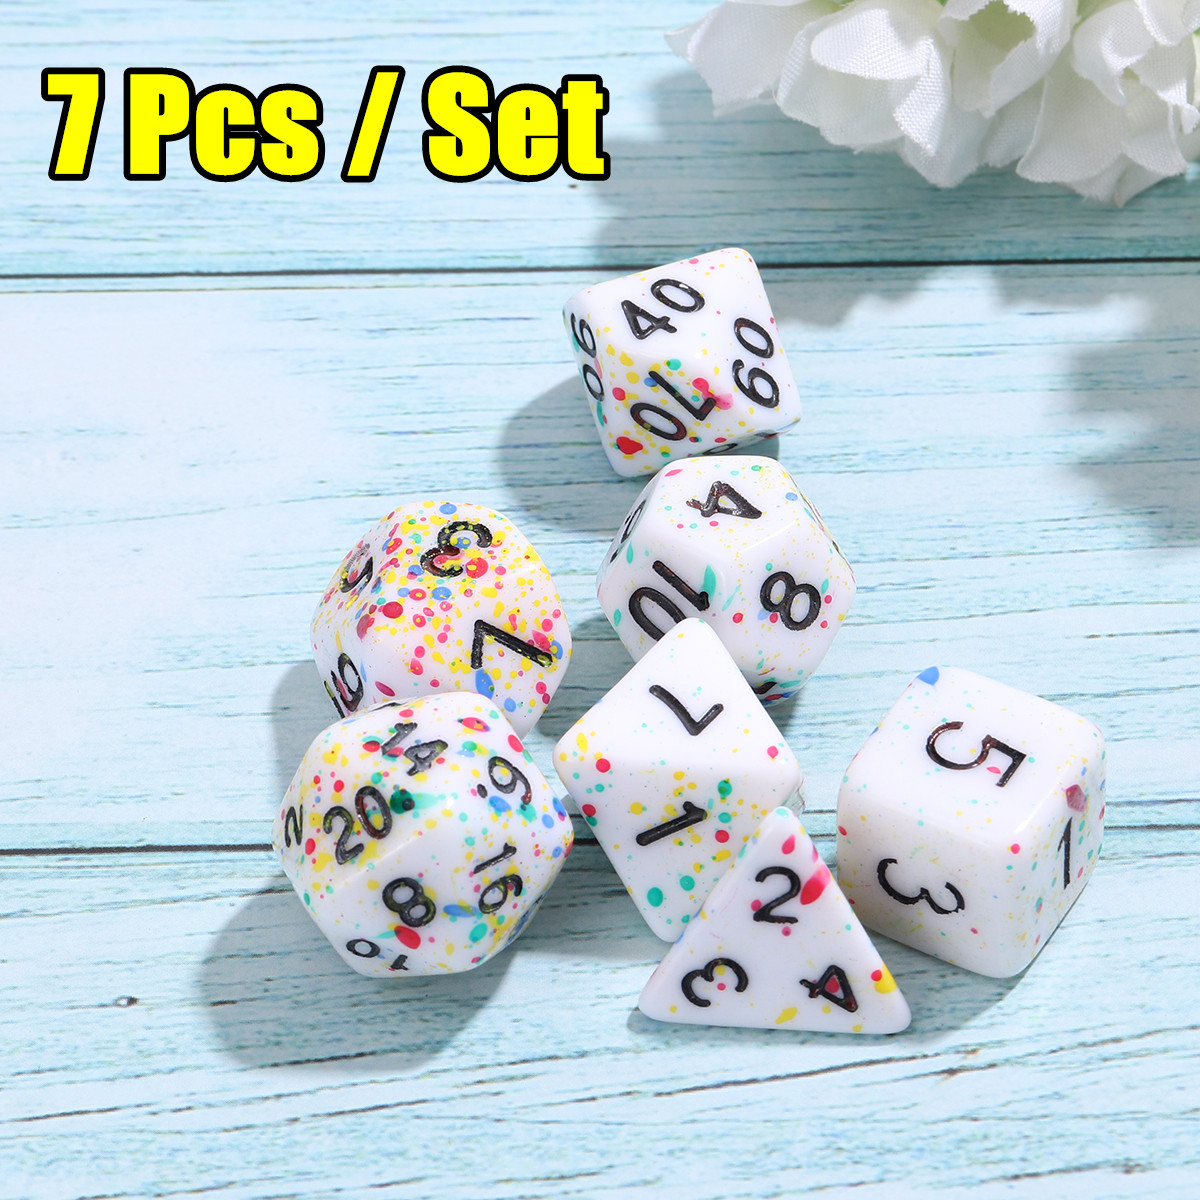 7Pcs-Acrylic-Polyhedral-Dice-Set-Colorful-Board-Game-Multisided-Dices-Gadget-1690588-2